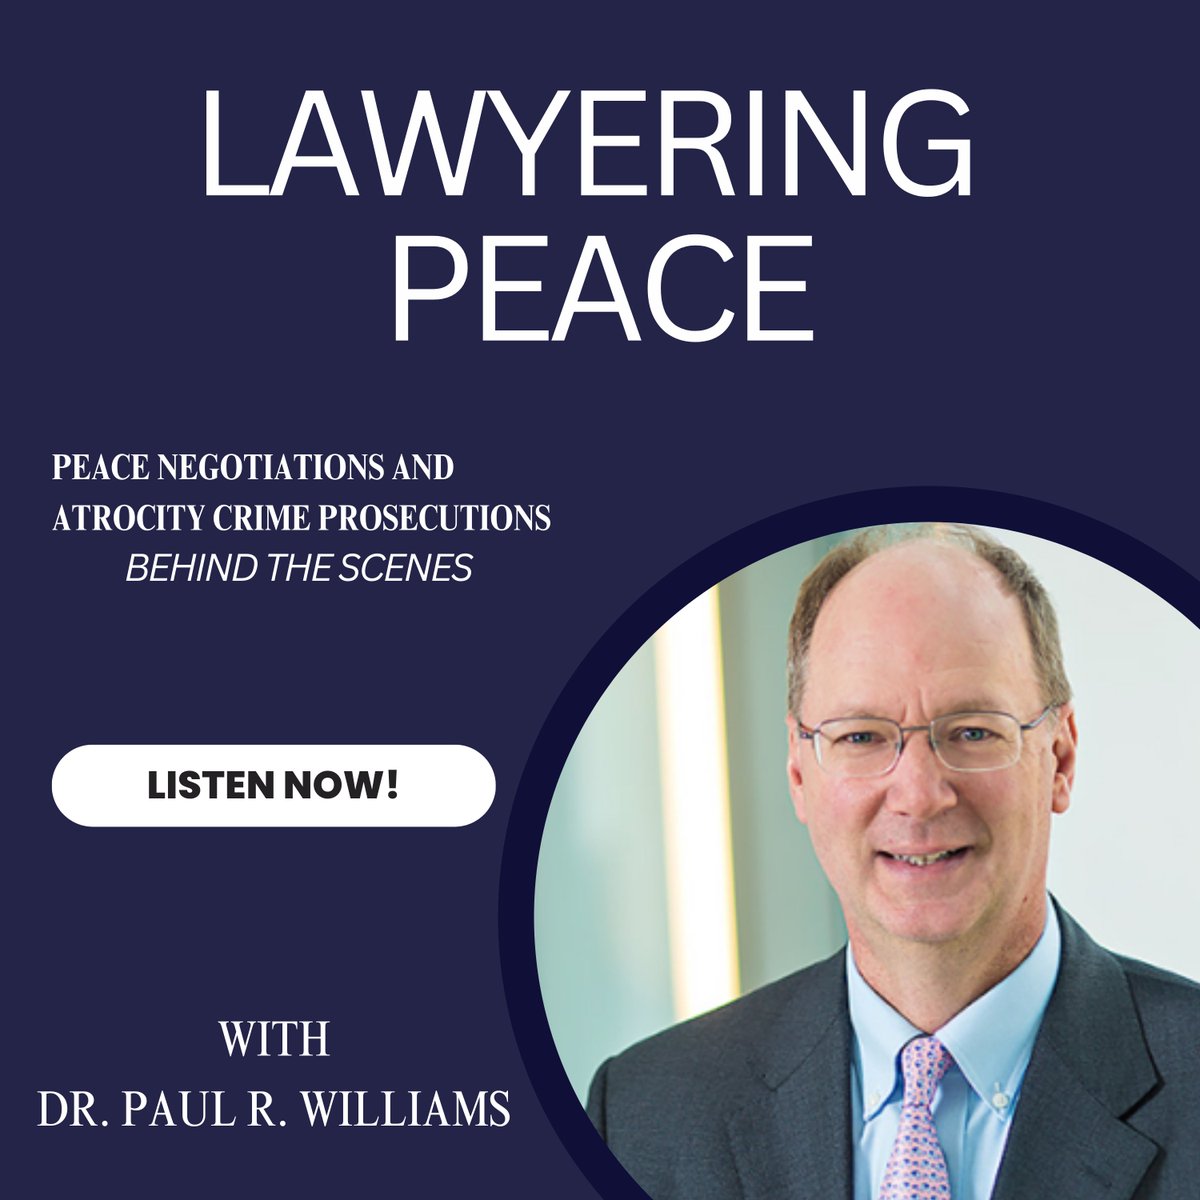 Tune into my new series “Lawyering Peace”, for an insider's look into the intricate processes of fostering durable peace and justice on the international stage. Now available on most podcast streaming platforms and YouTube: drpaulrwilliams.com/lawyering-peac…